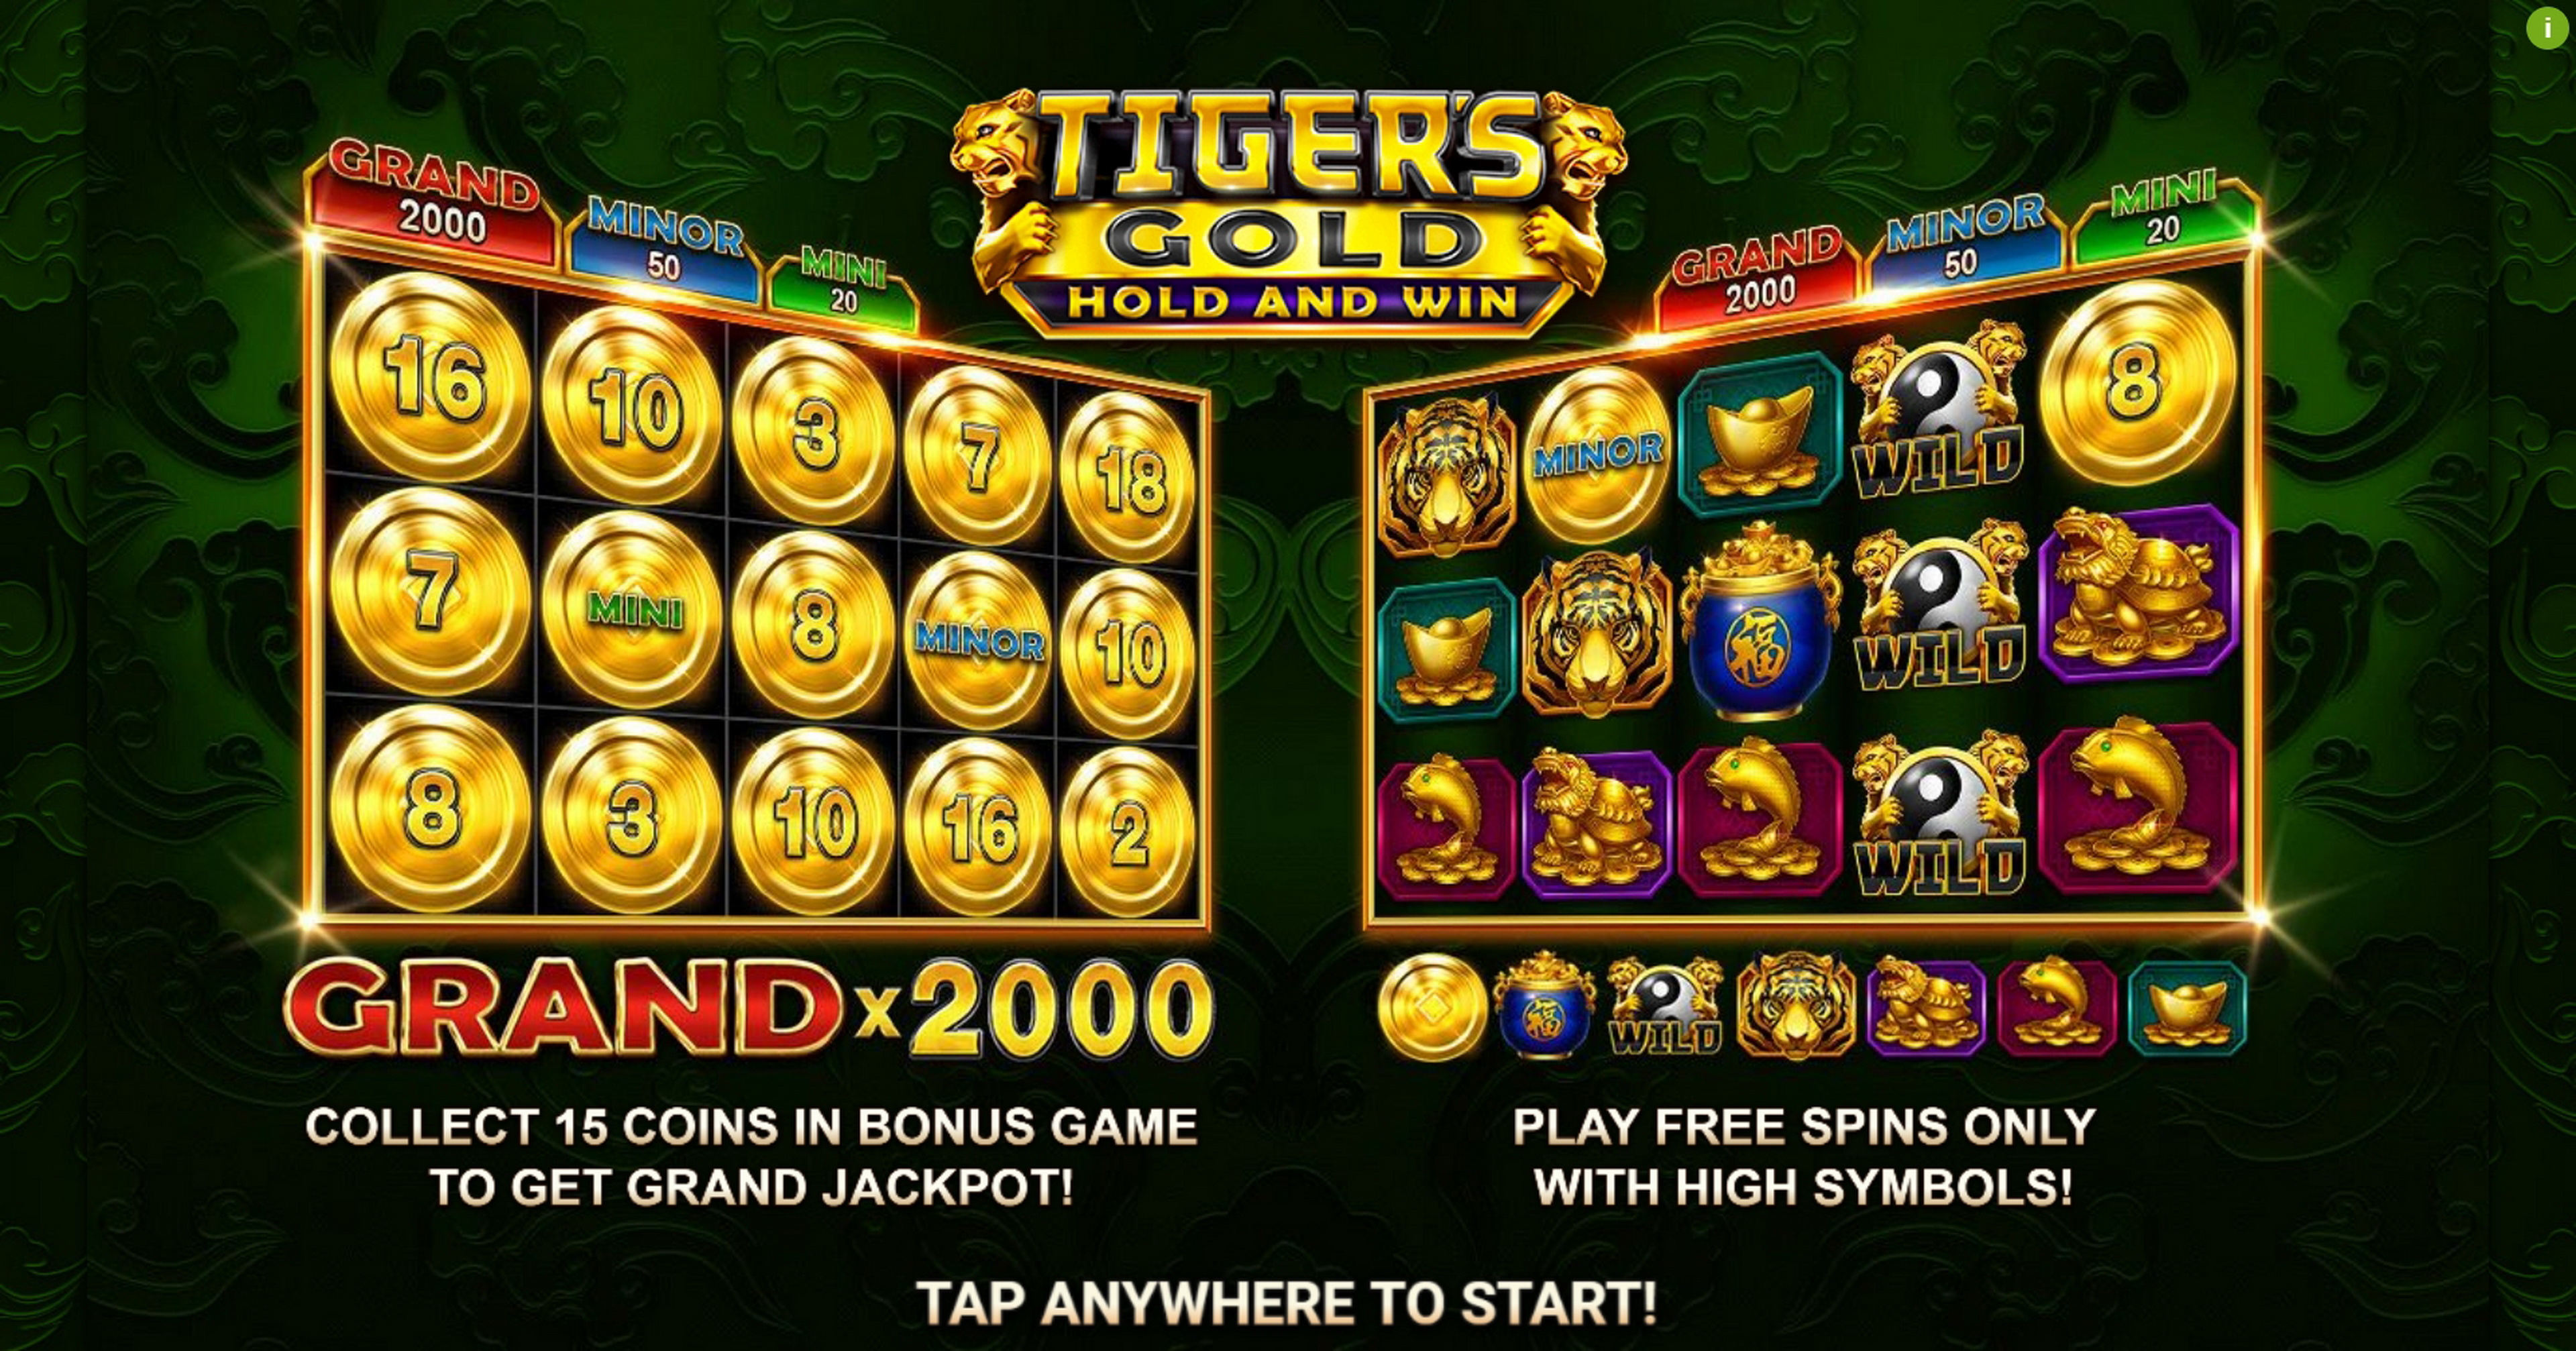 Play Tiger's Gold Hold and Win Free Casino Slot Game by Booongo Gaming